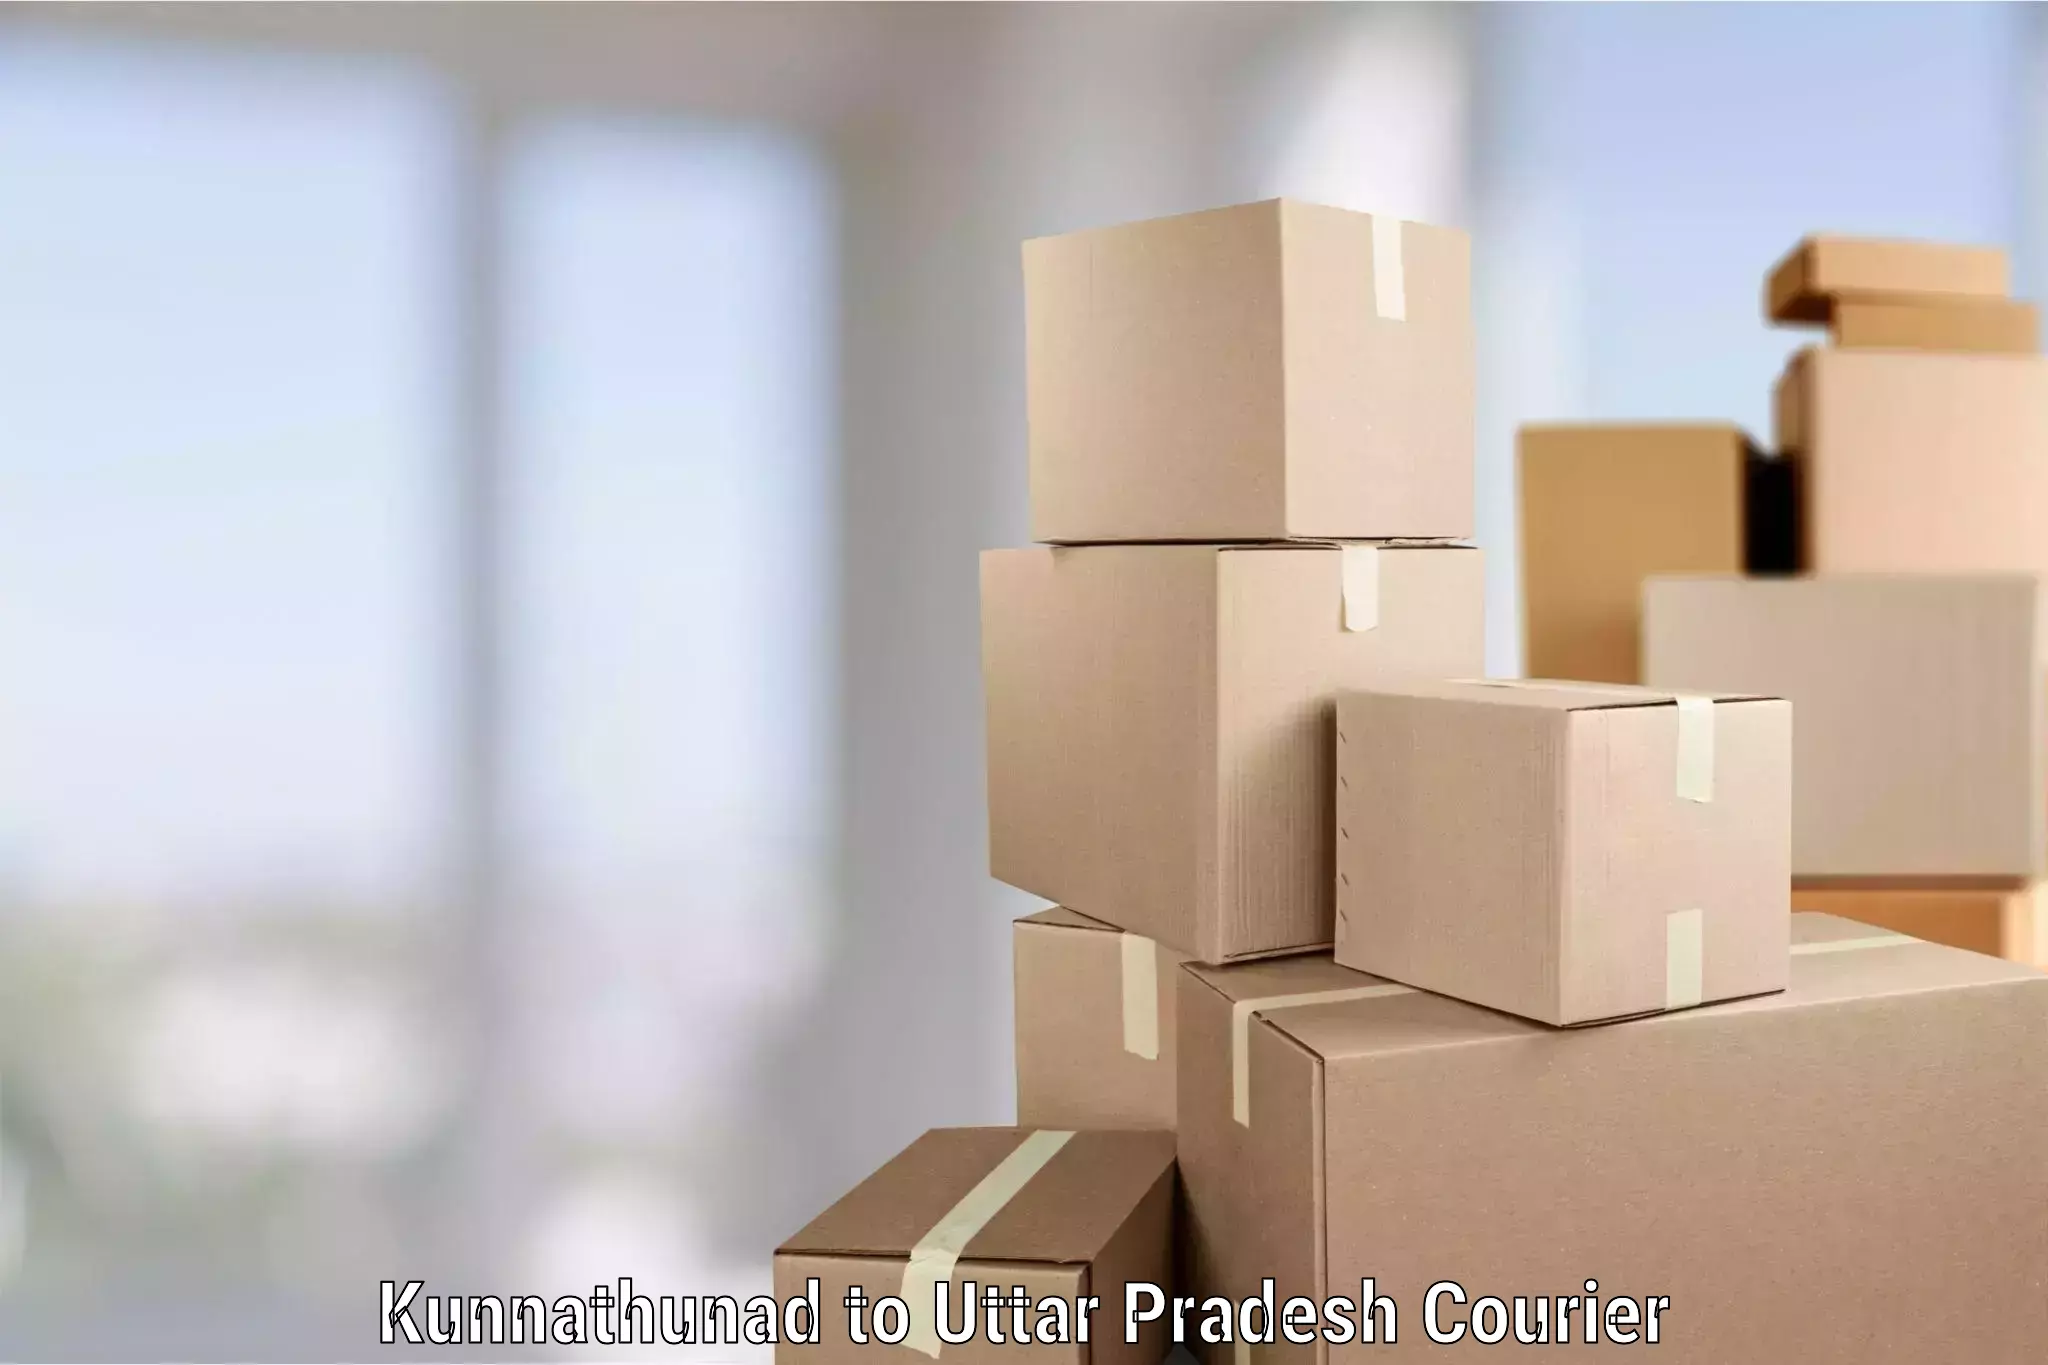 Professional packing services in Kunnathunad to Parora